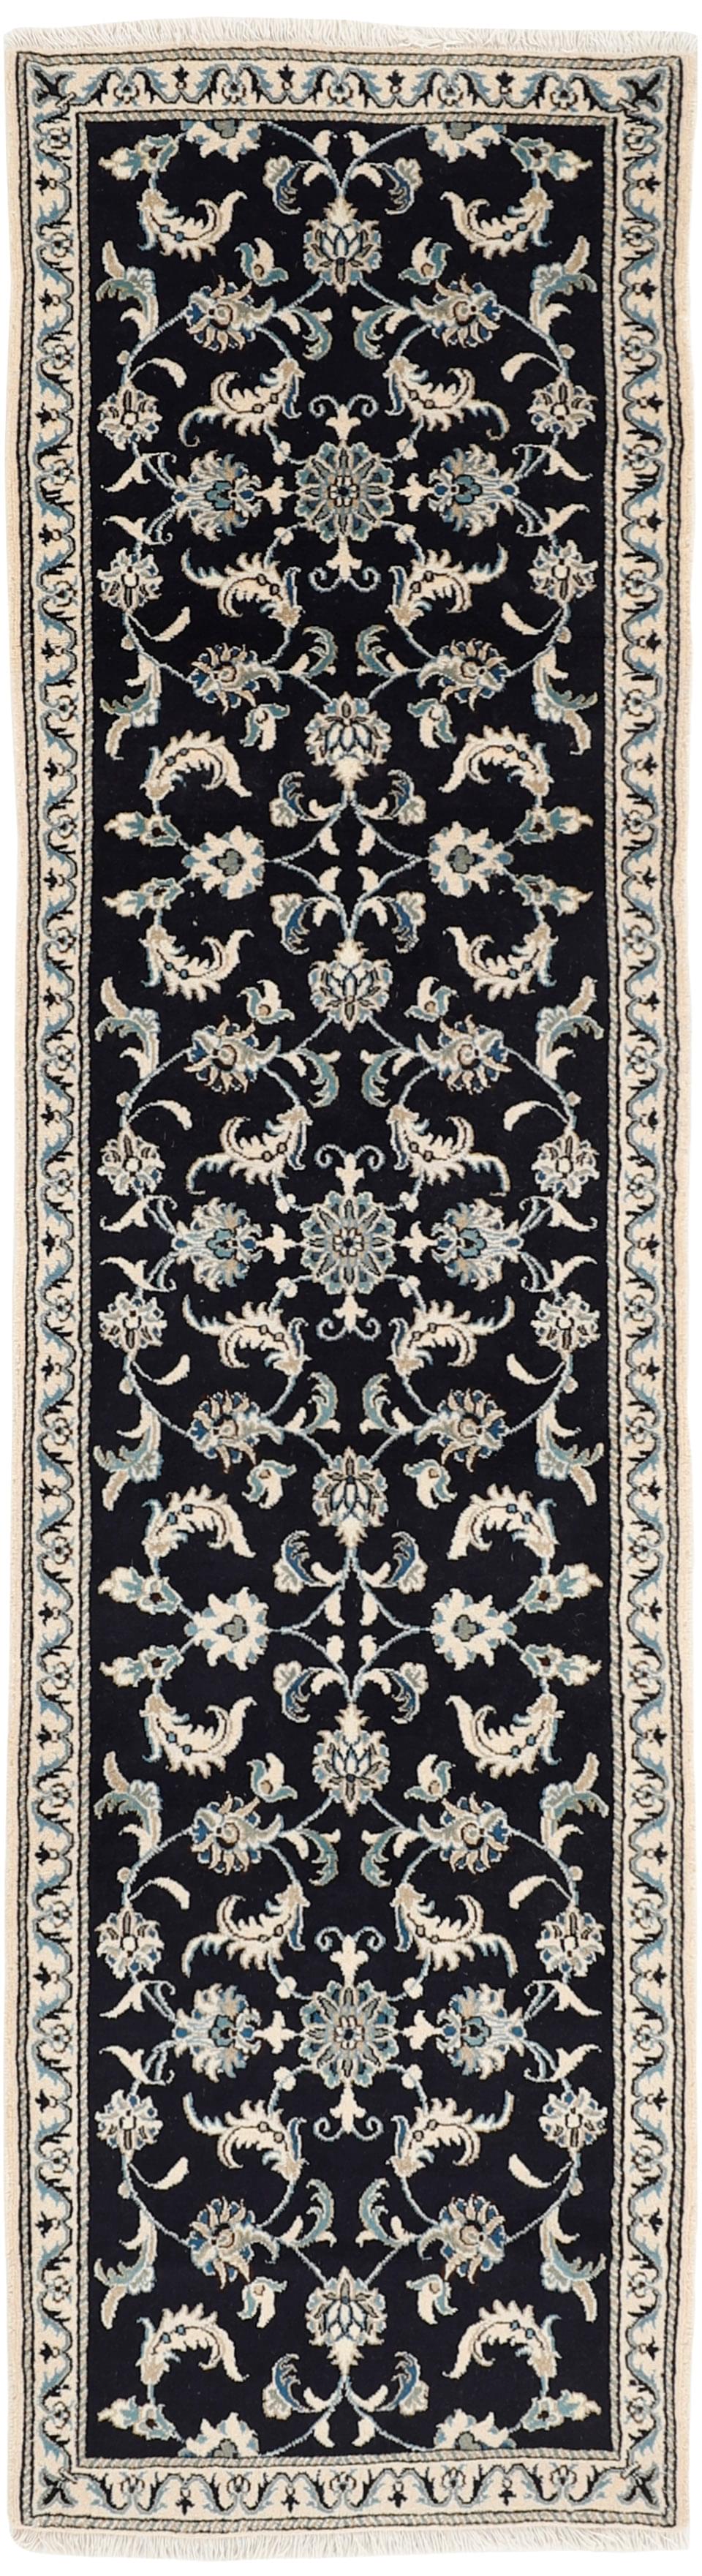 authentic persian runner with black and beige floral design